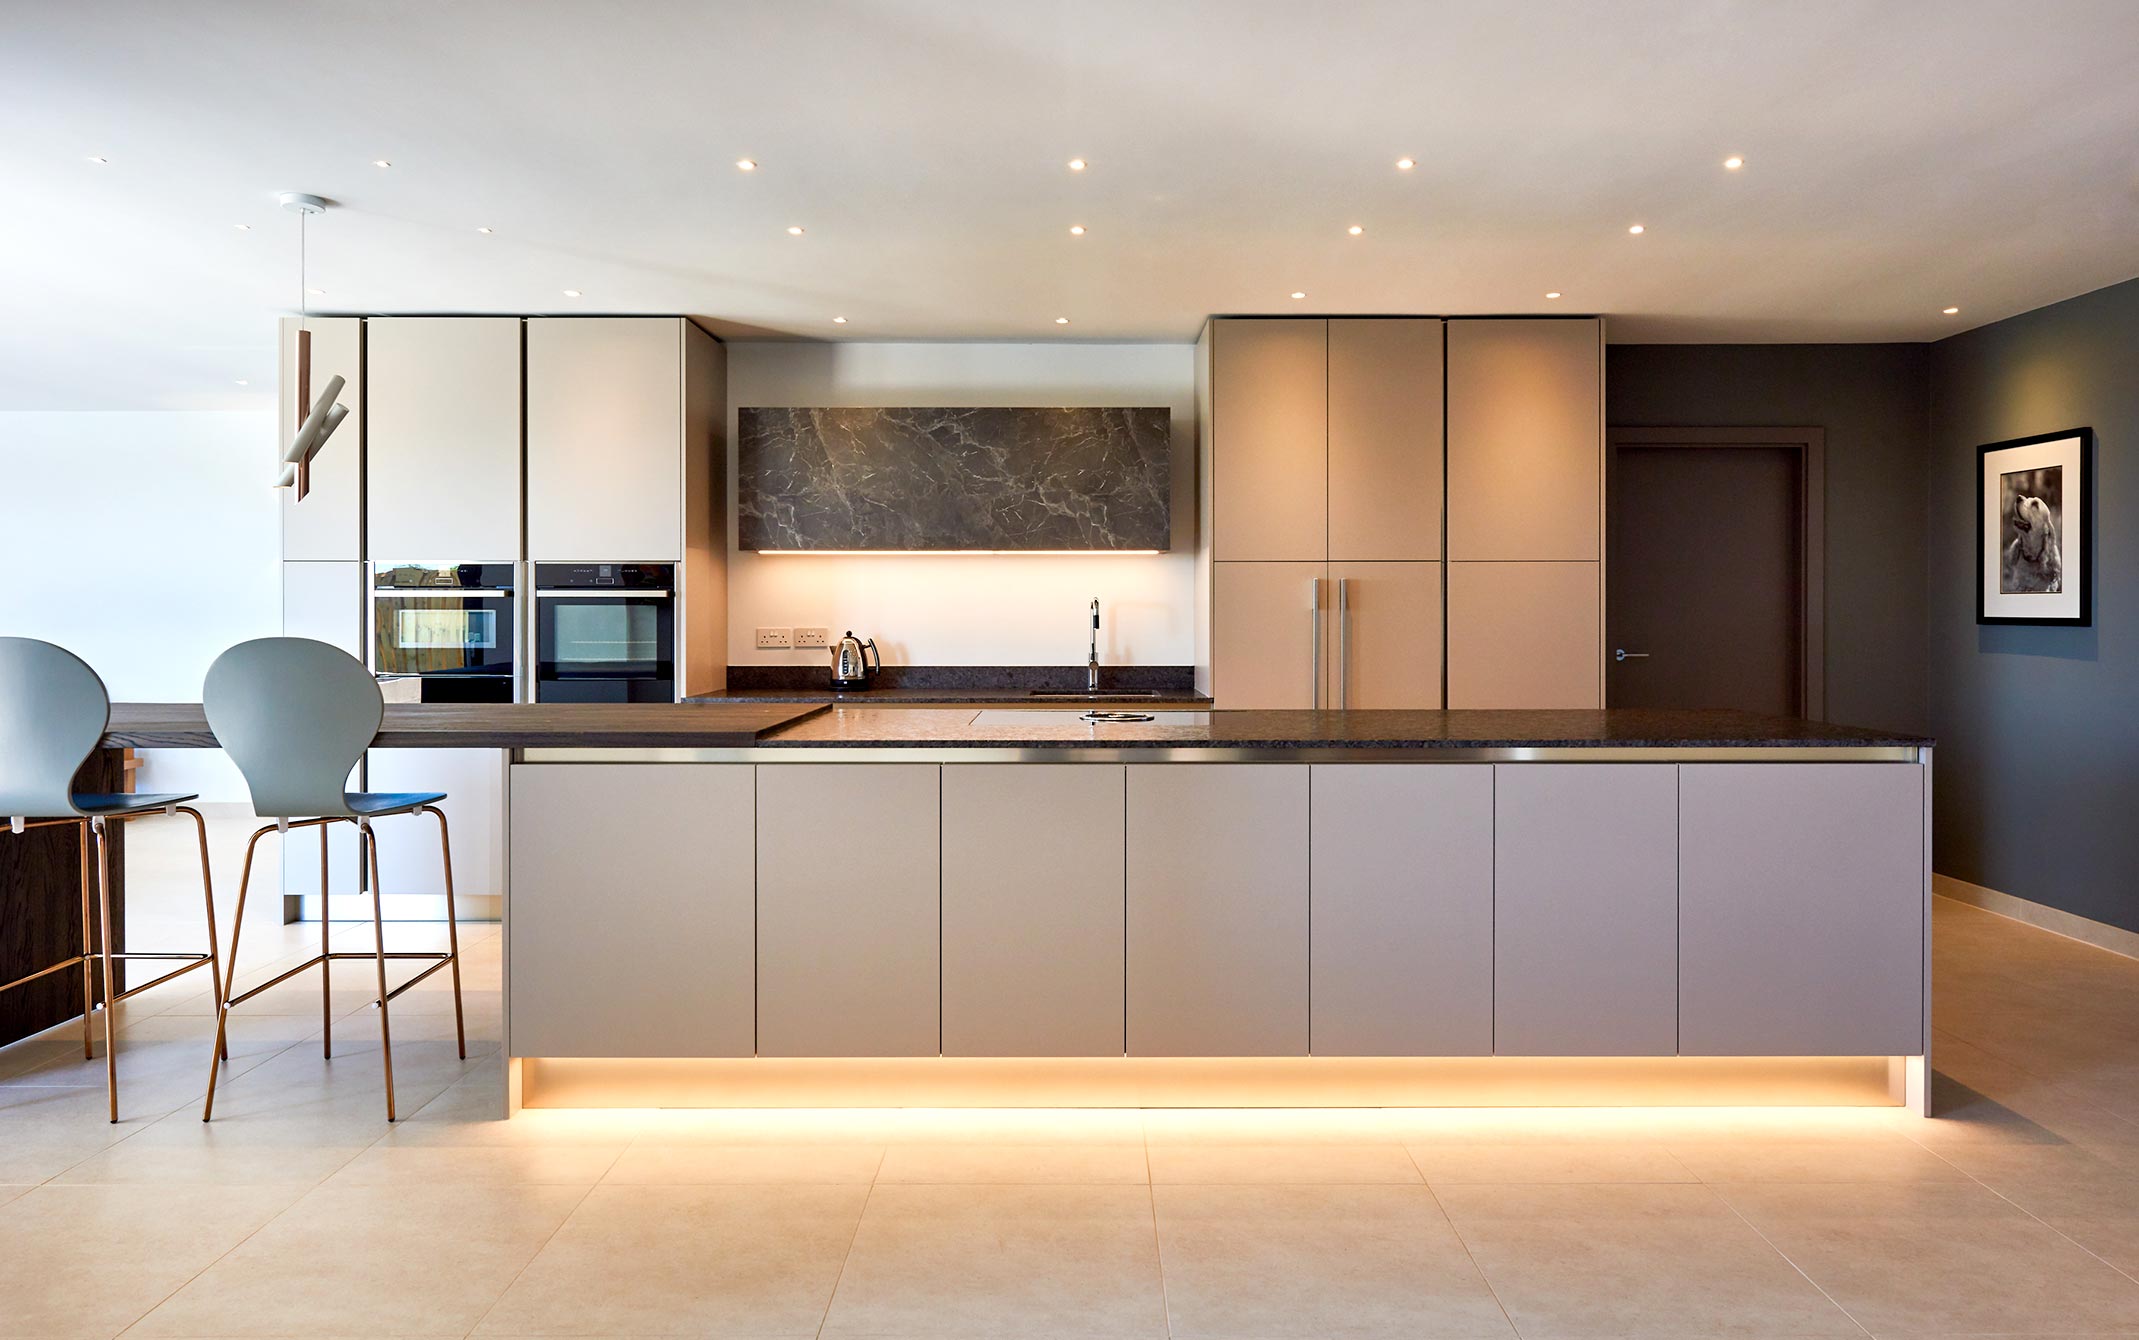 The Linear Kitchen - Seamless sophistication in Redditch - Galerie